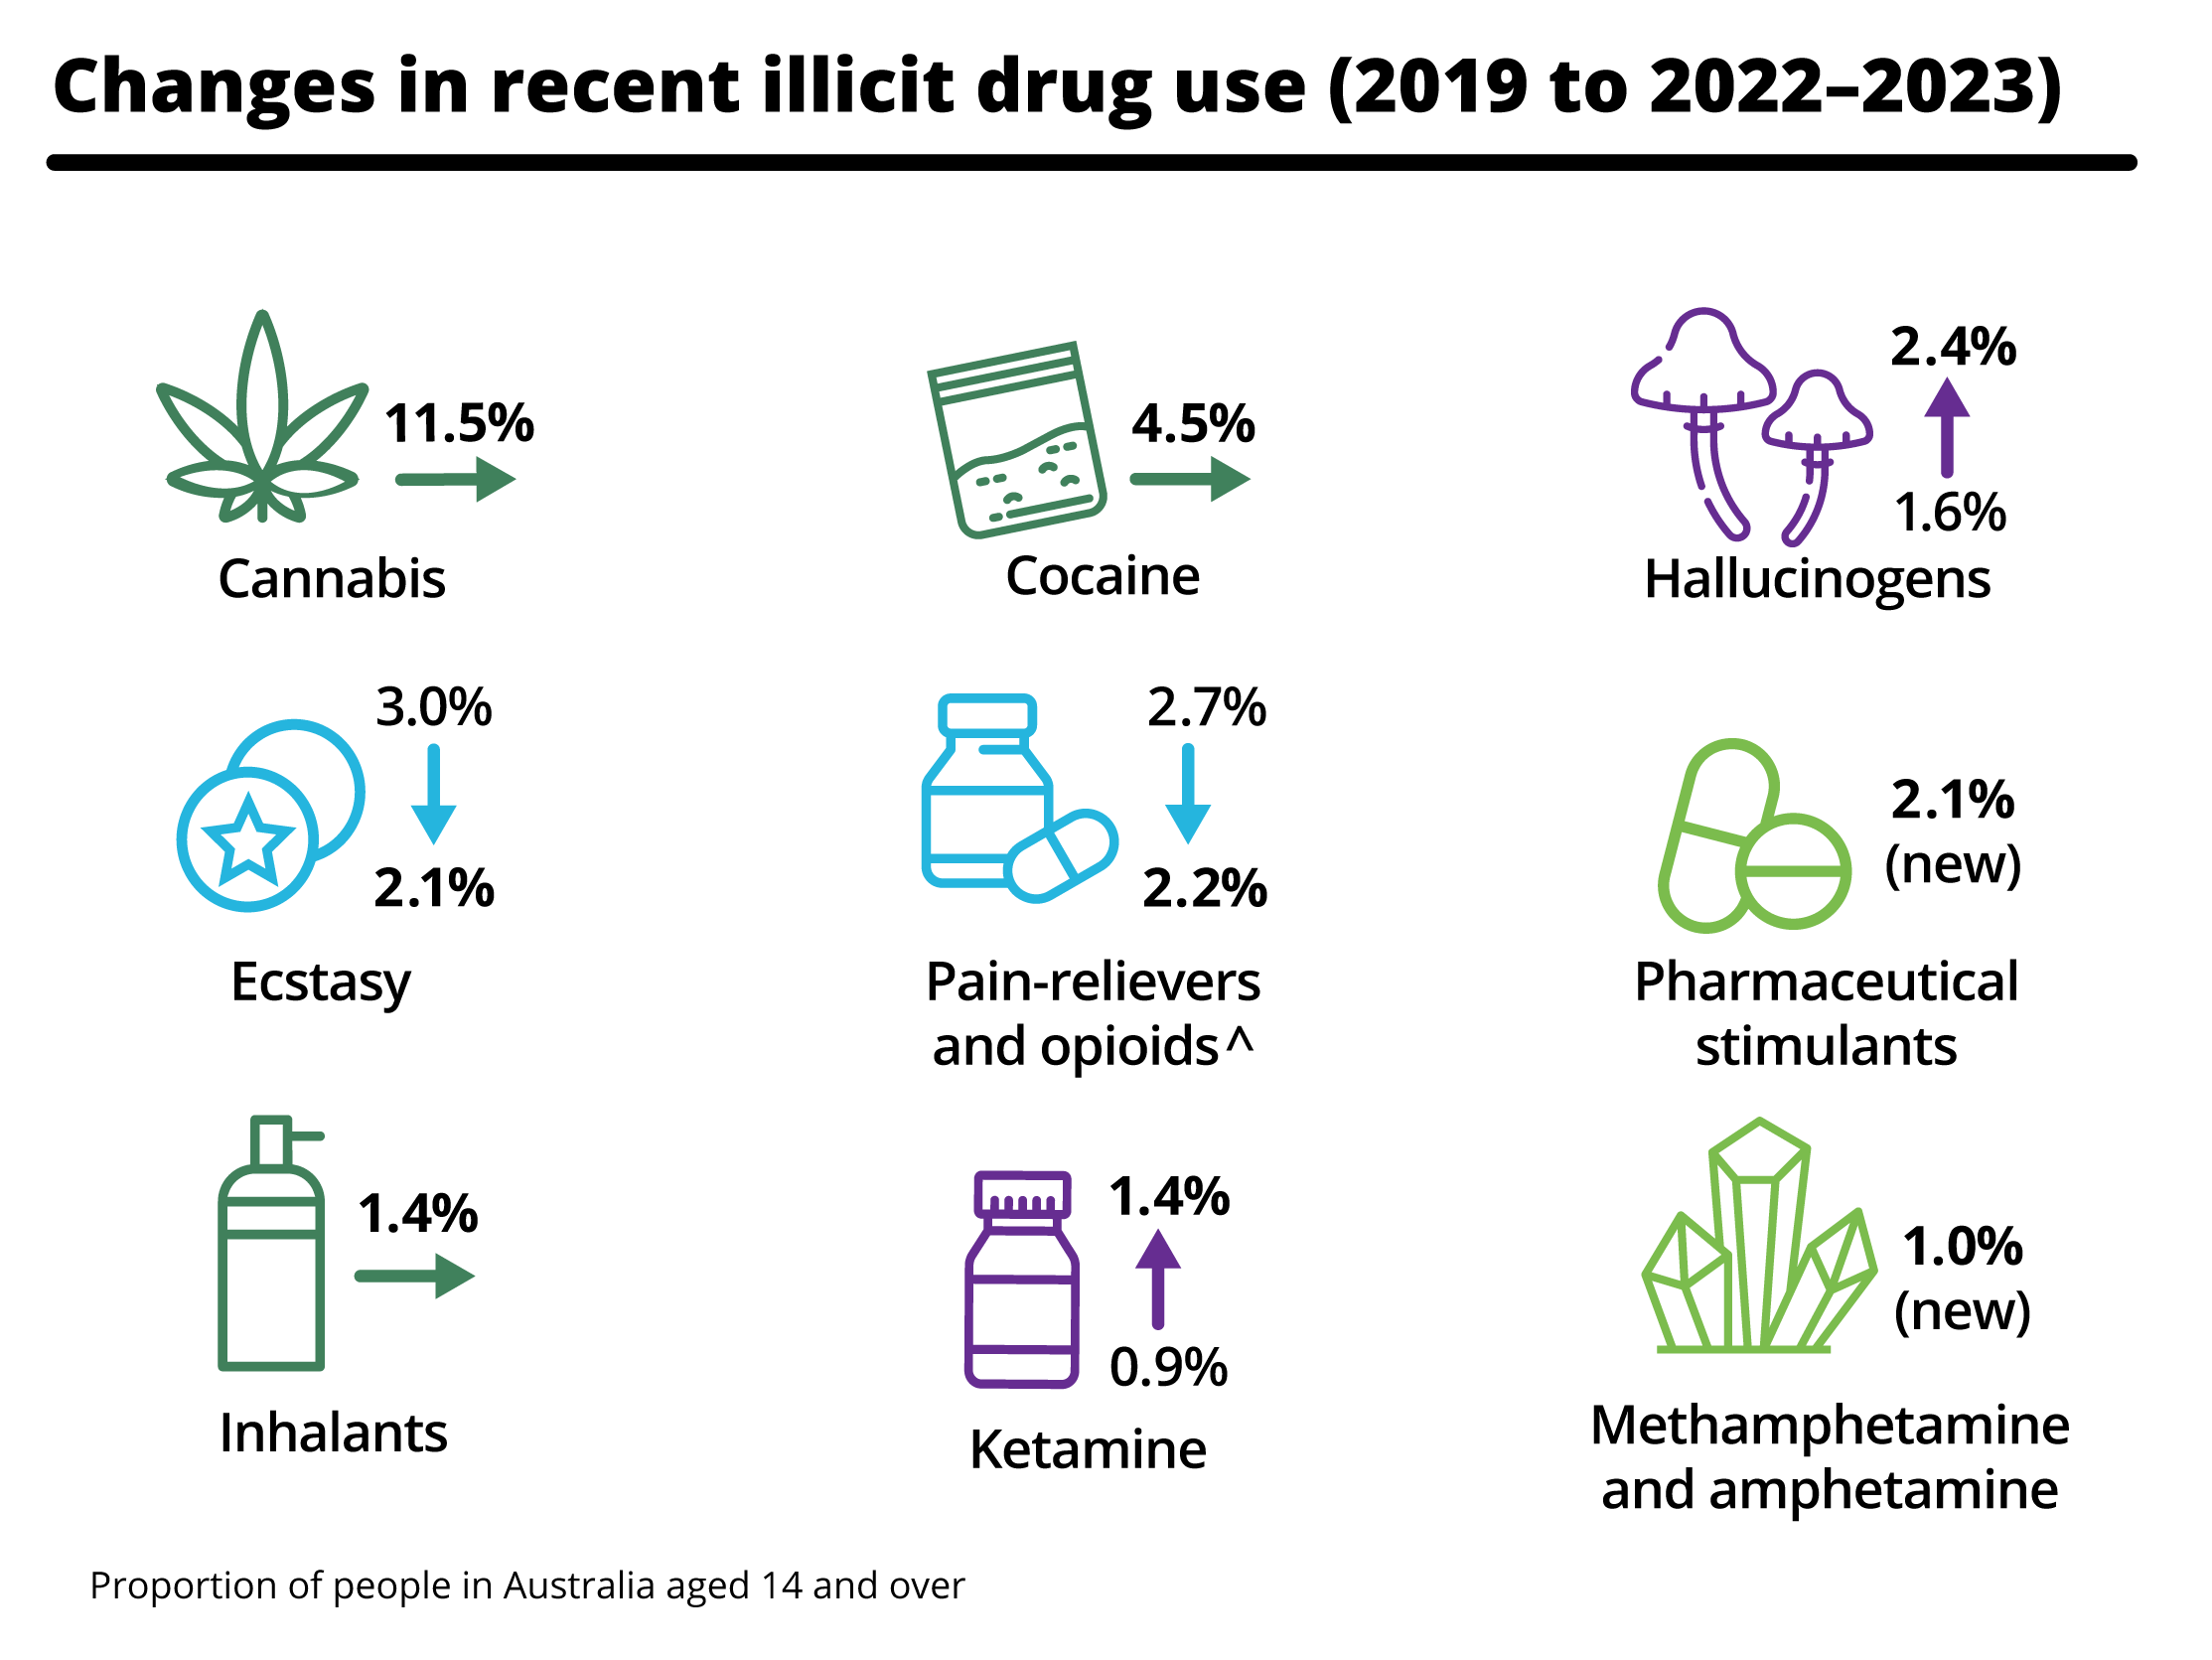 The infographic shows increases in the use of hallucinogens and ketamine between 2019 and 2022–2023, and decreases in ecstasy, and pain-relievers and opioids.